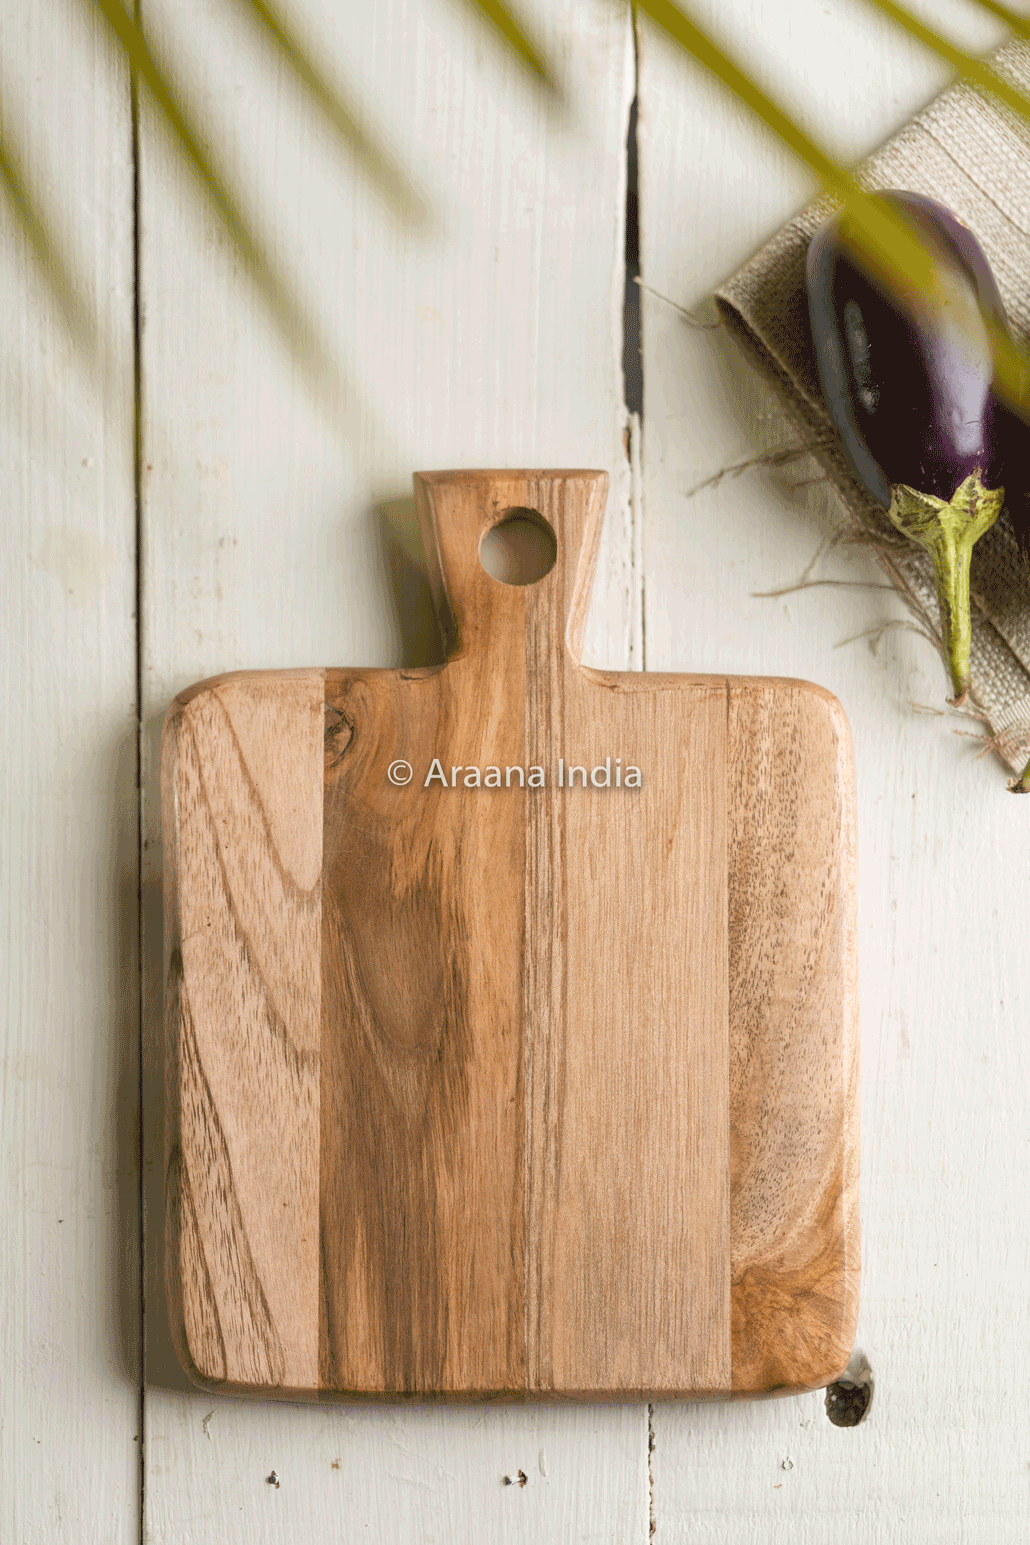 Thumbnail preview #6 for Chauras - Small classic square chopping board